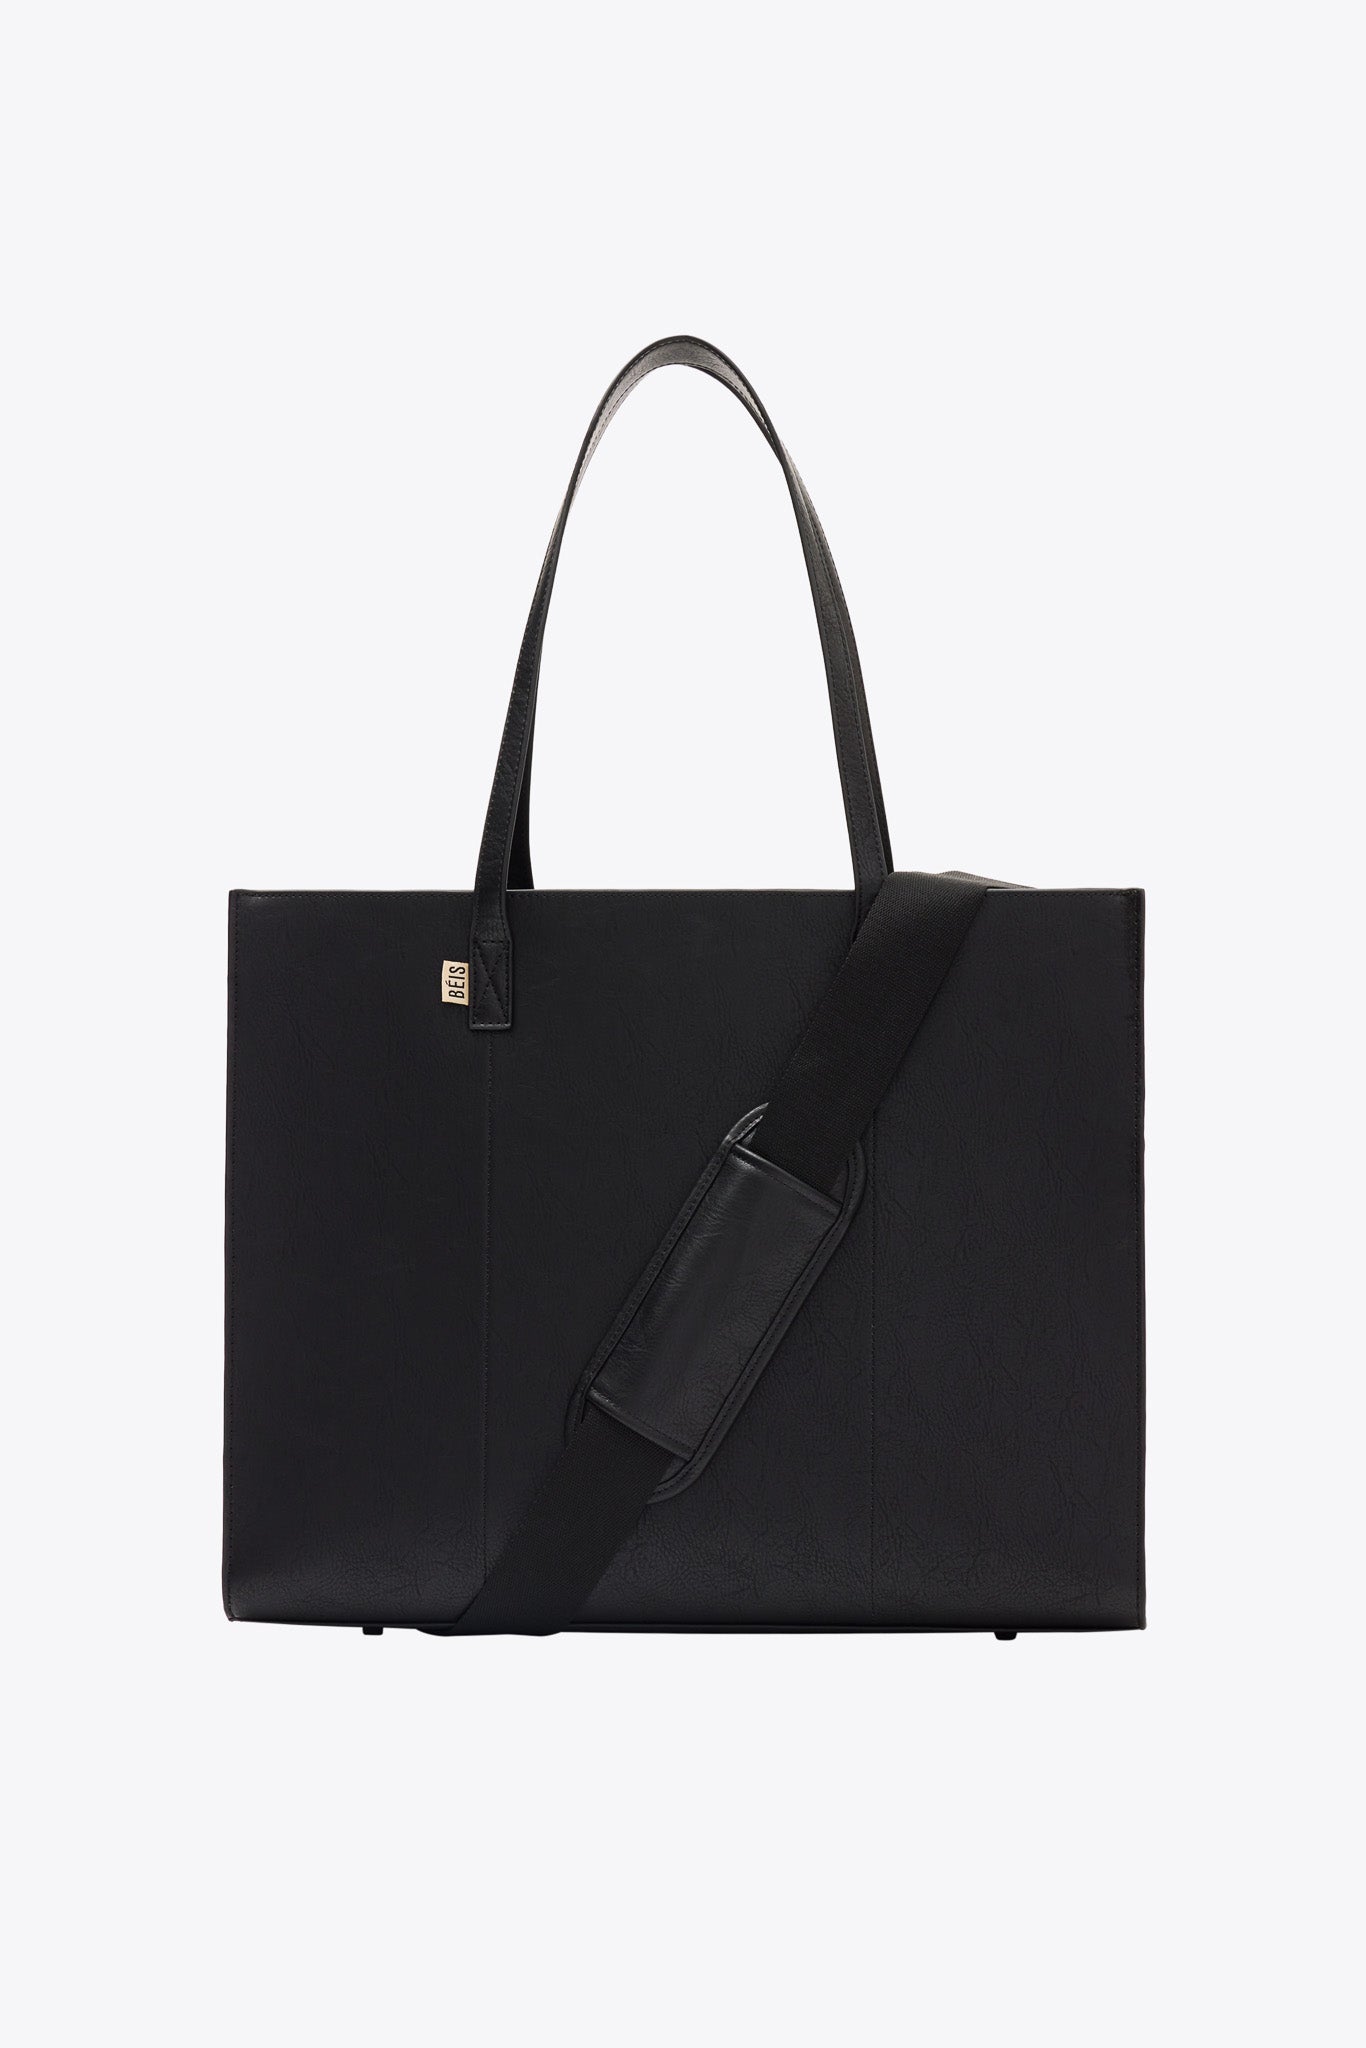 BÉIS 'The Large Work Tote' in Black - Womens Large Laptop Bag in Black